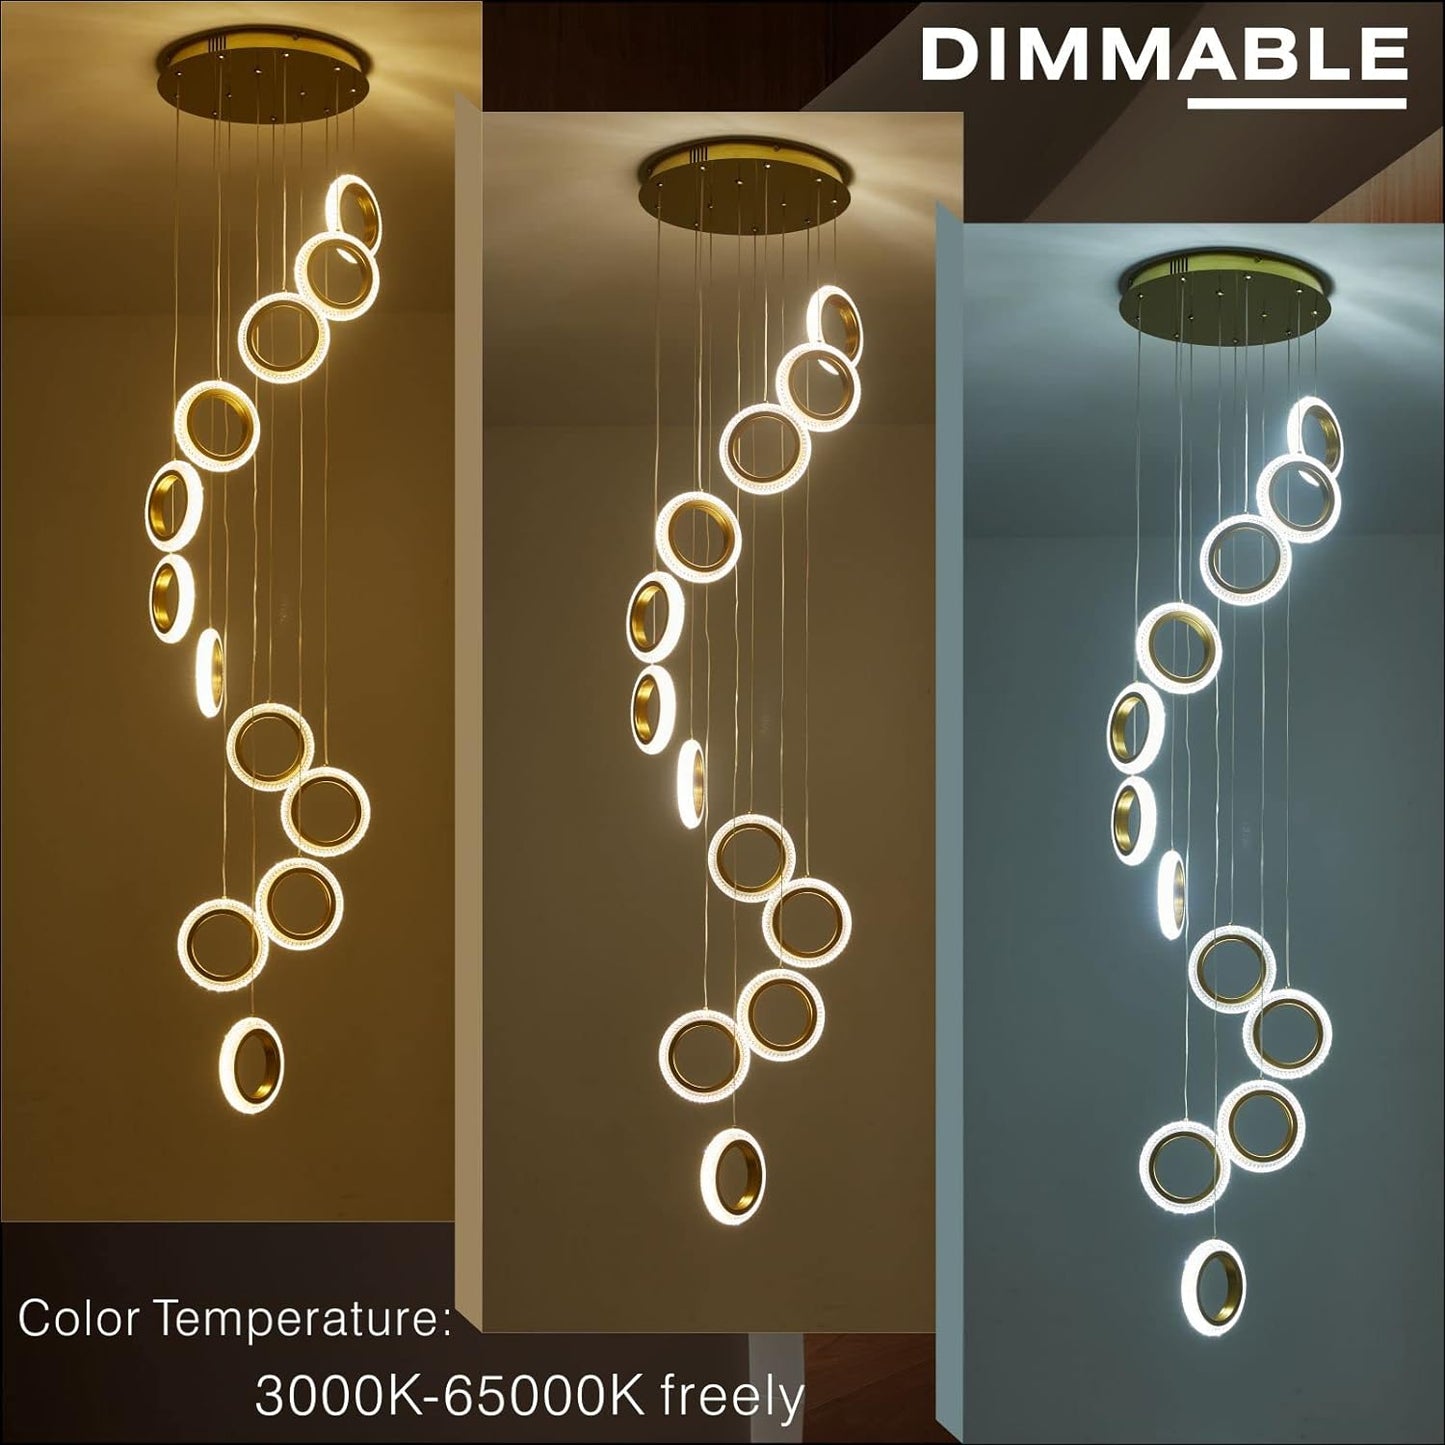 9 Ring Chandelier, Gold Crystal Chandelier, Dimmable Modern Led Chandelier with Remote,Luxy High Ceiling Chandelier for Dining Room, Foyer,Enterway,Big Modern Led Ceiling Light Hanging Pendant Li